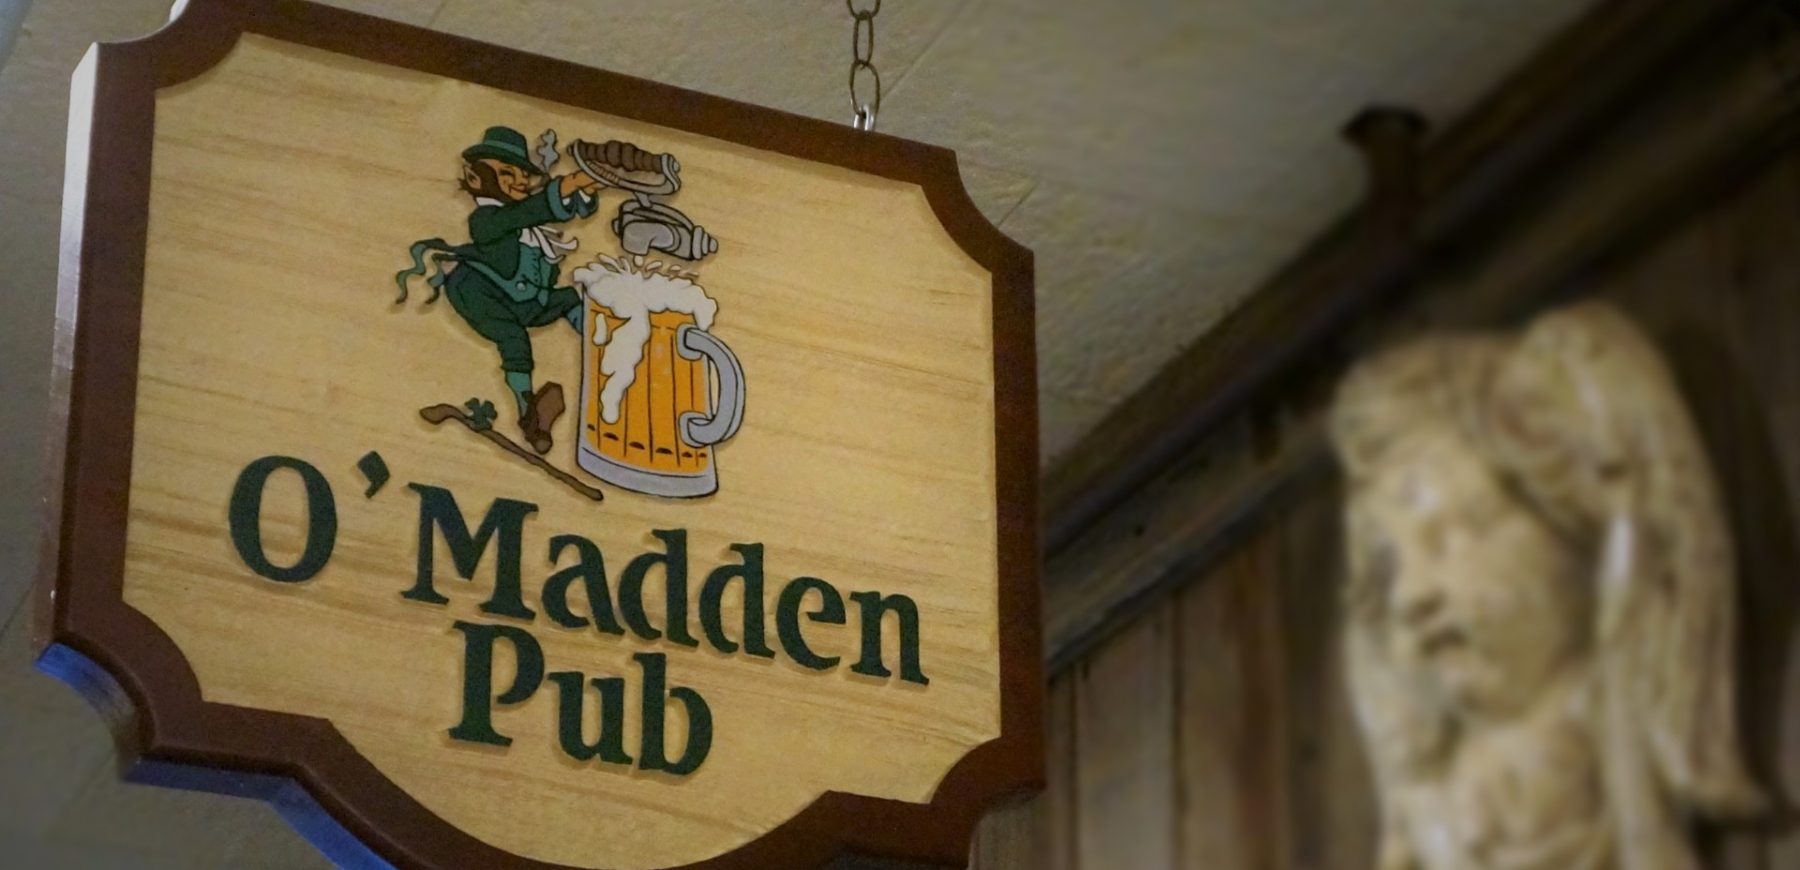 Closeup of the O'madden's pub wooden signage at the entrance of the pub